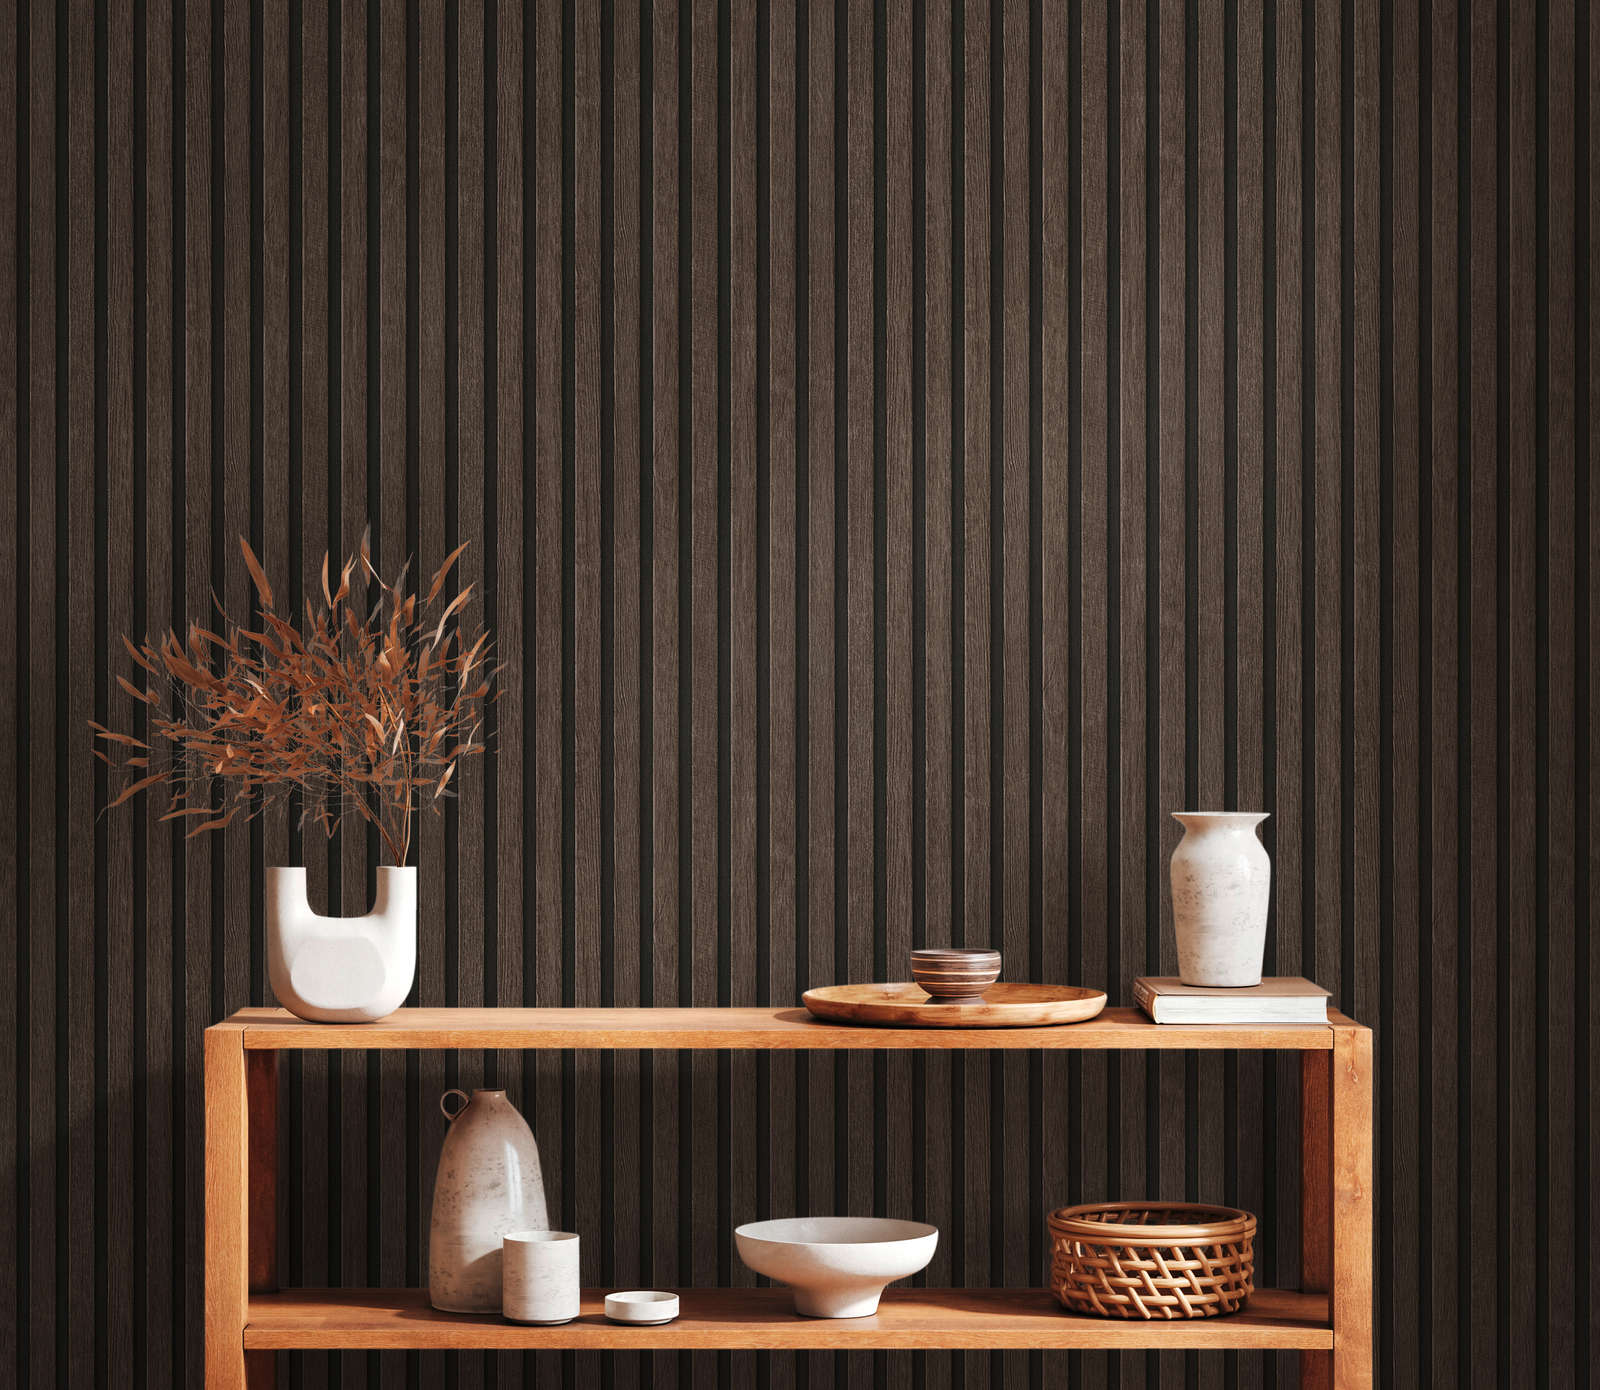             Wood panel wallpaper with fine structure - brown
        